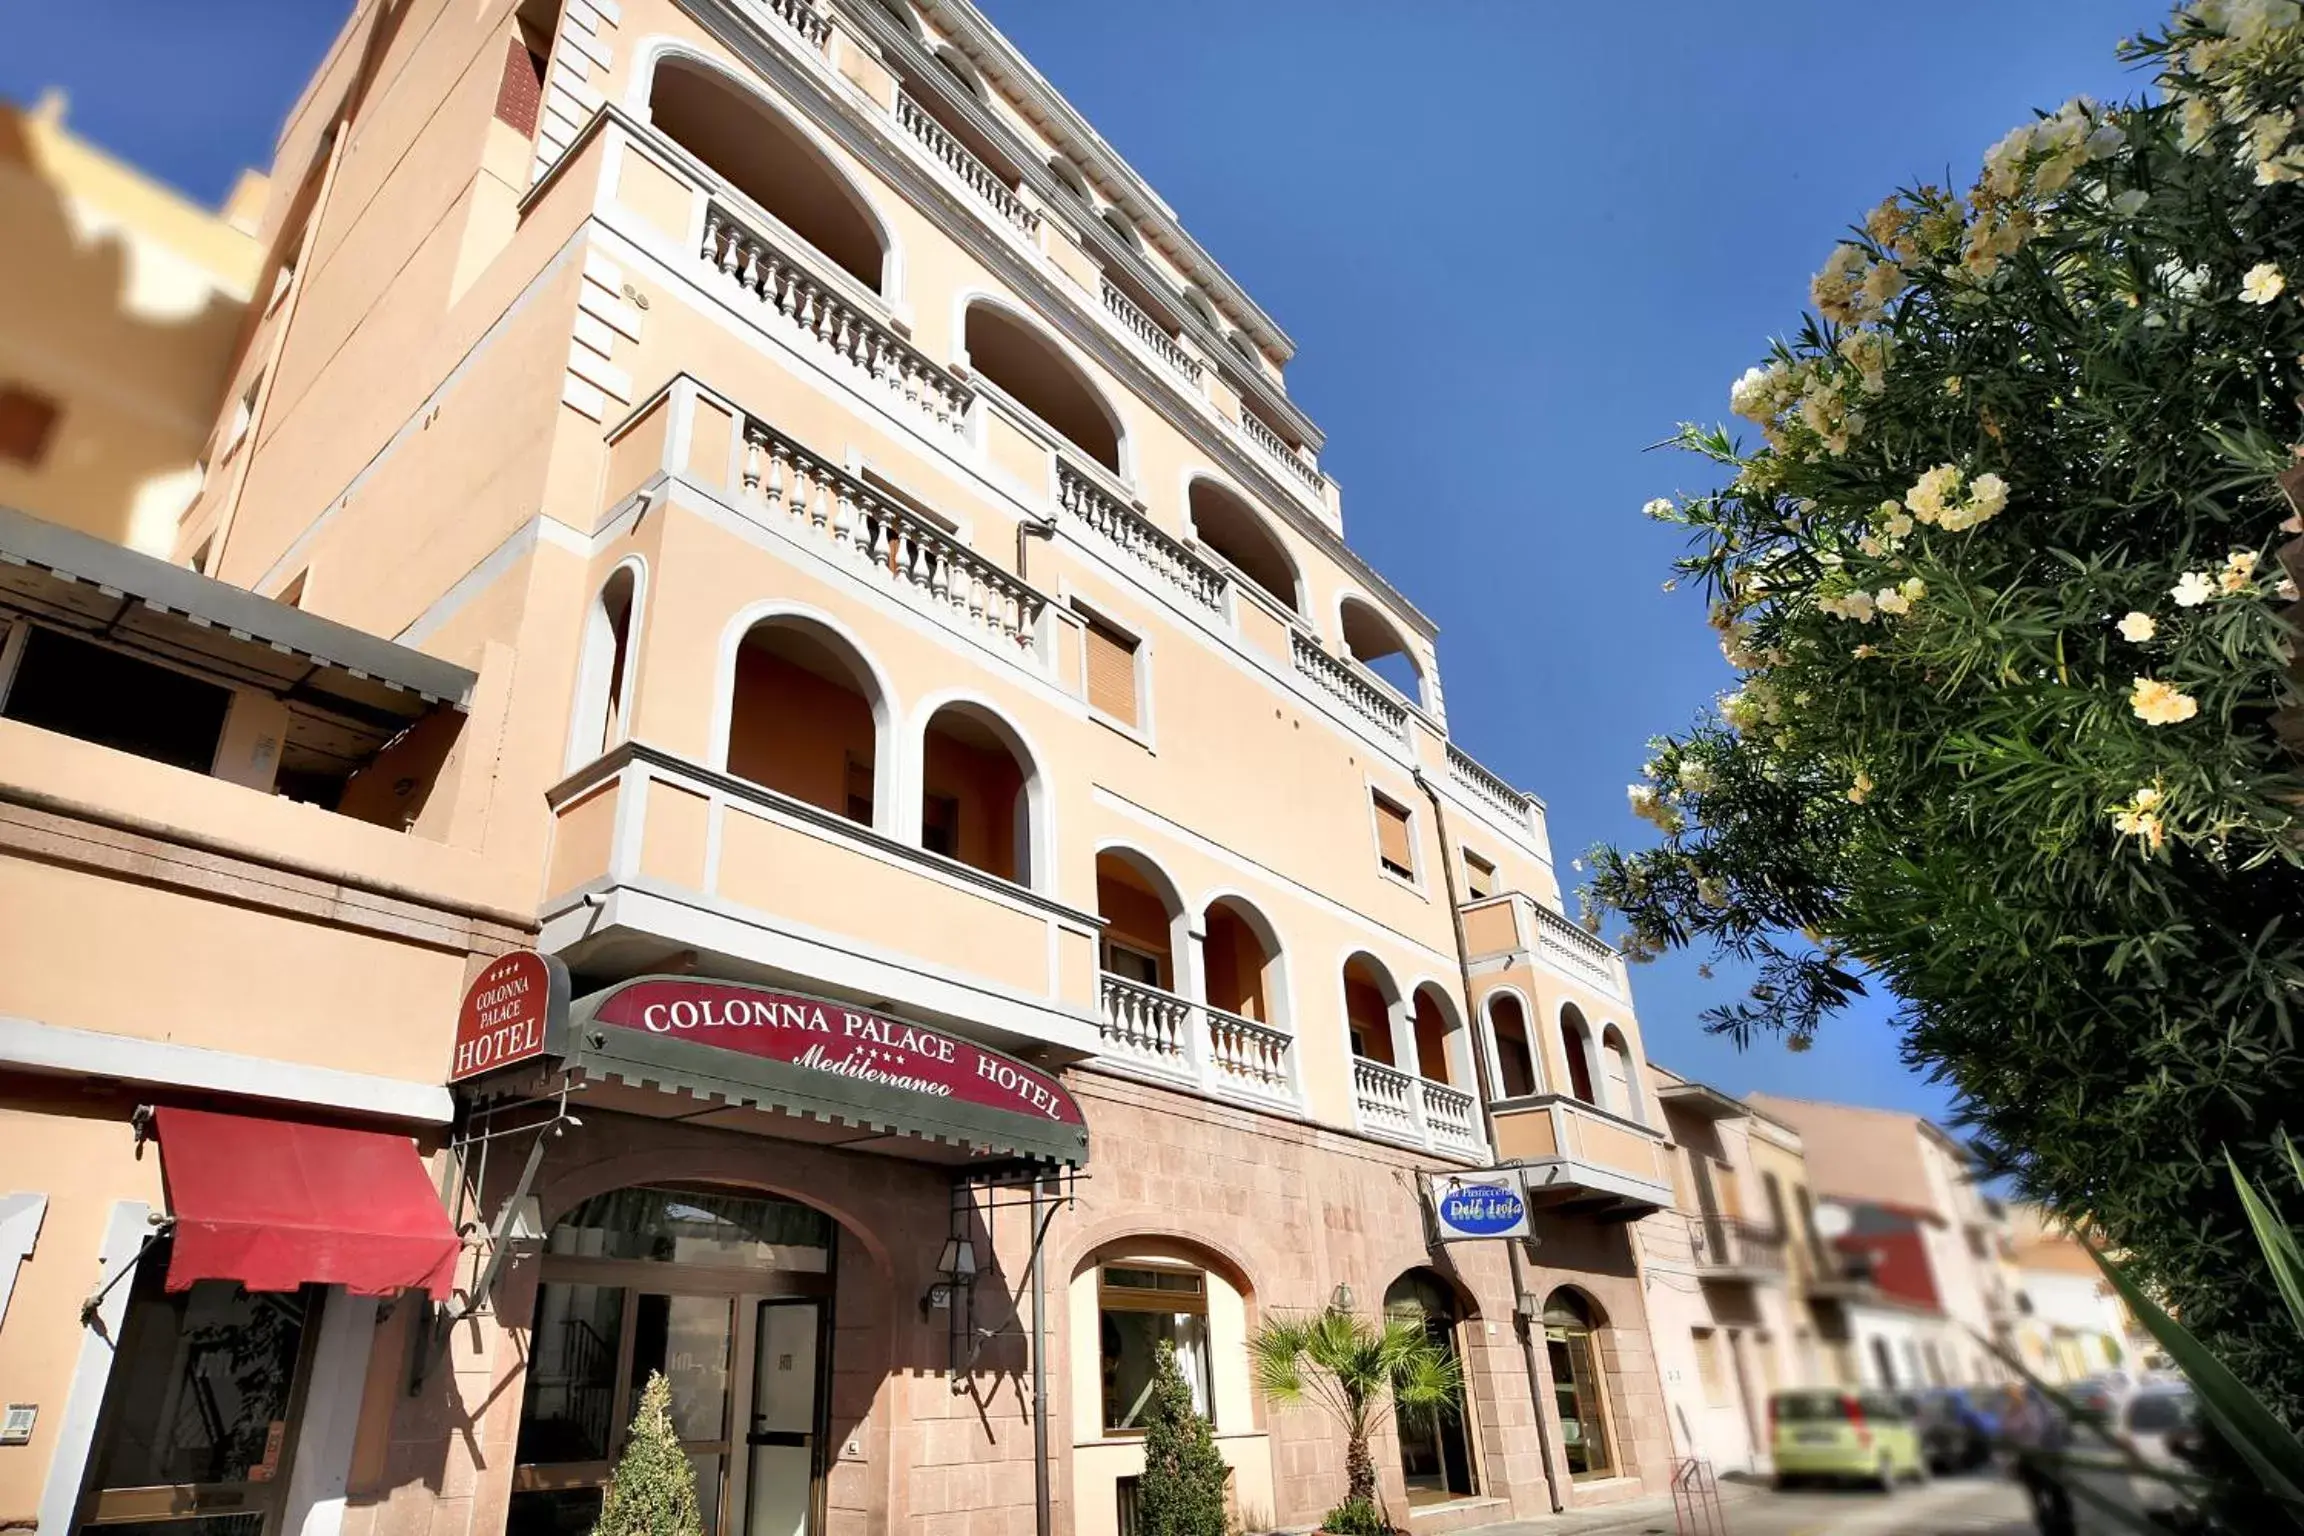 Property building in Colonna Palace Hotel Mediterraneo